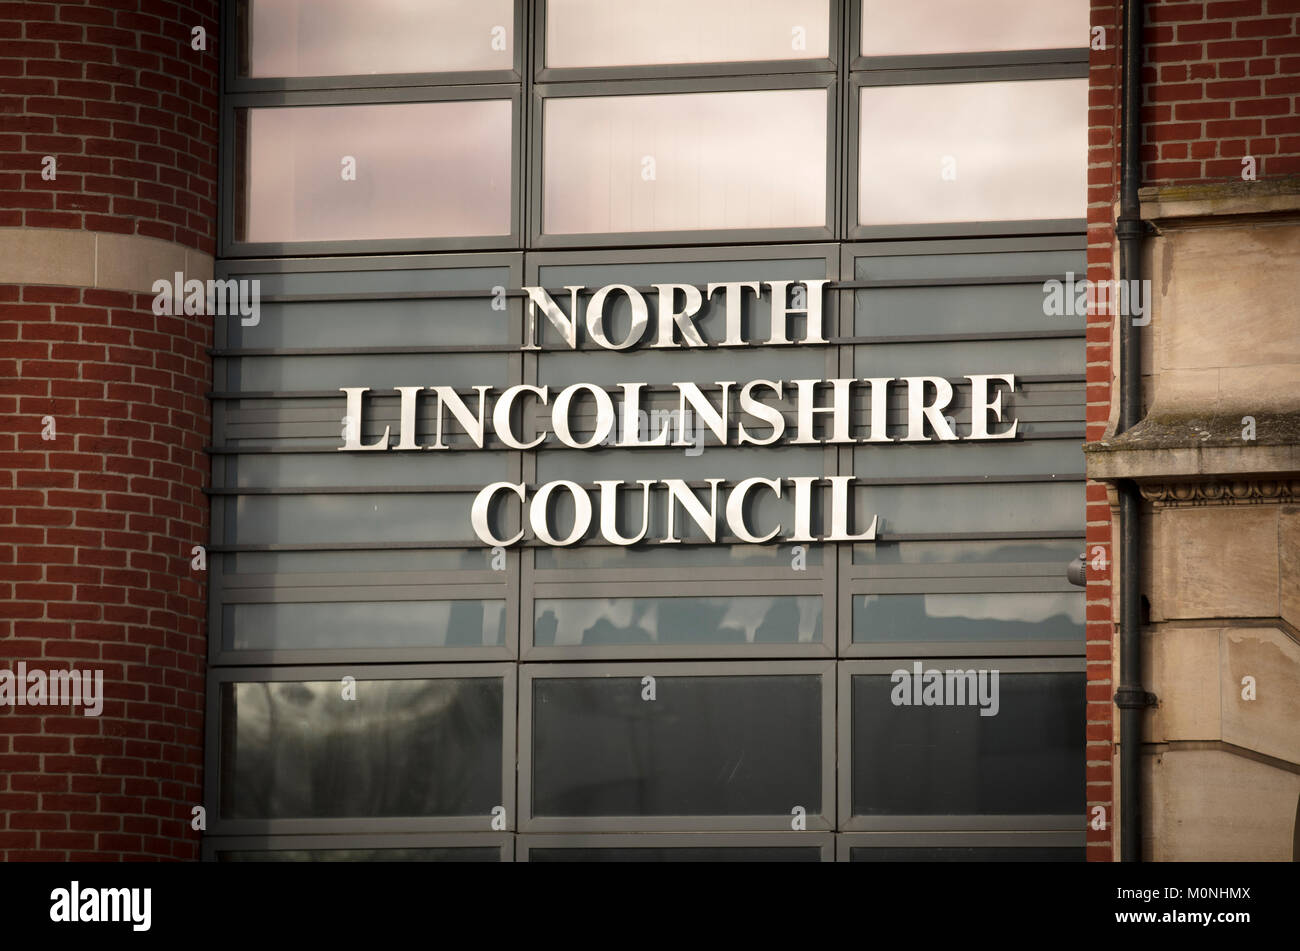 North Lincolnshire Council Building Entrance in Church Square - Scunthorpe, Lincolnshire, United Kingdom - 23rd January 2018 Stock Photo